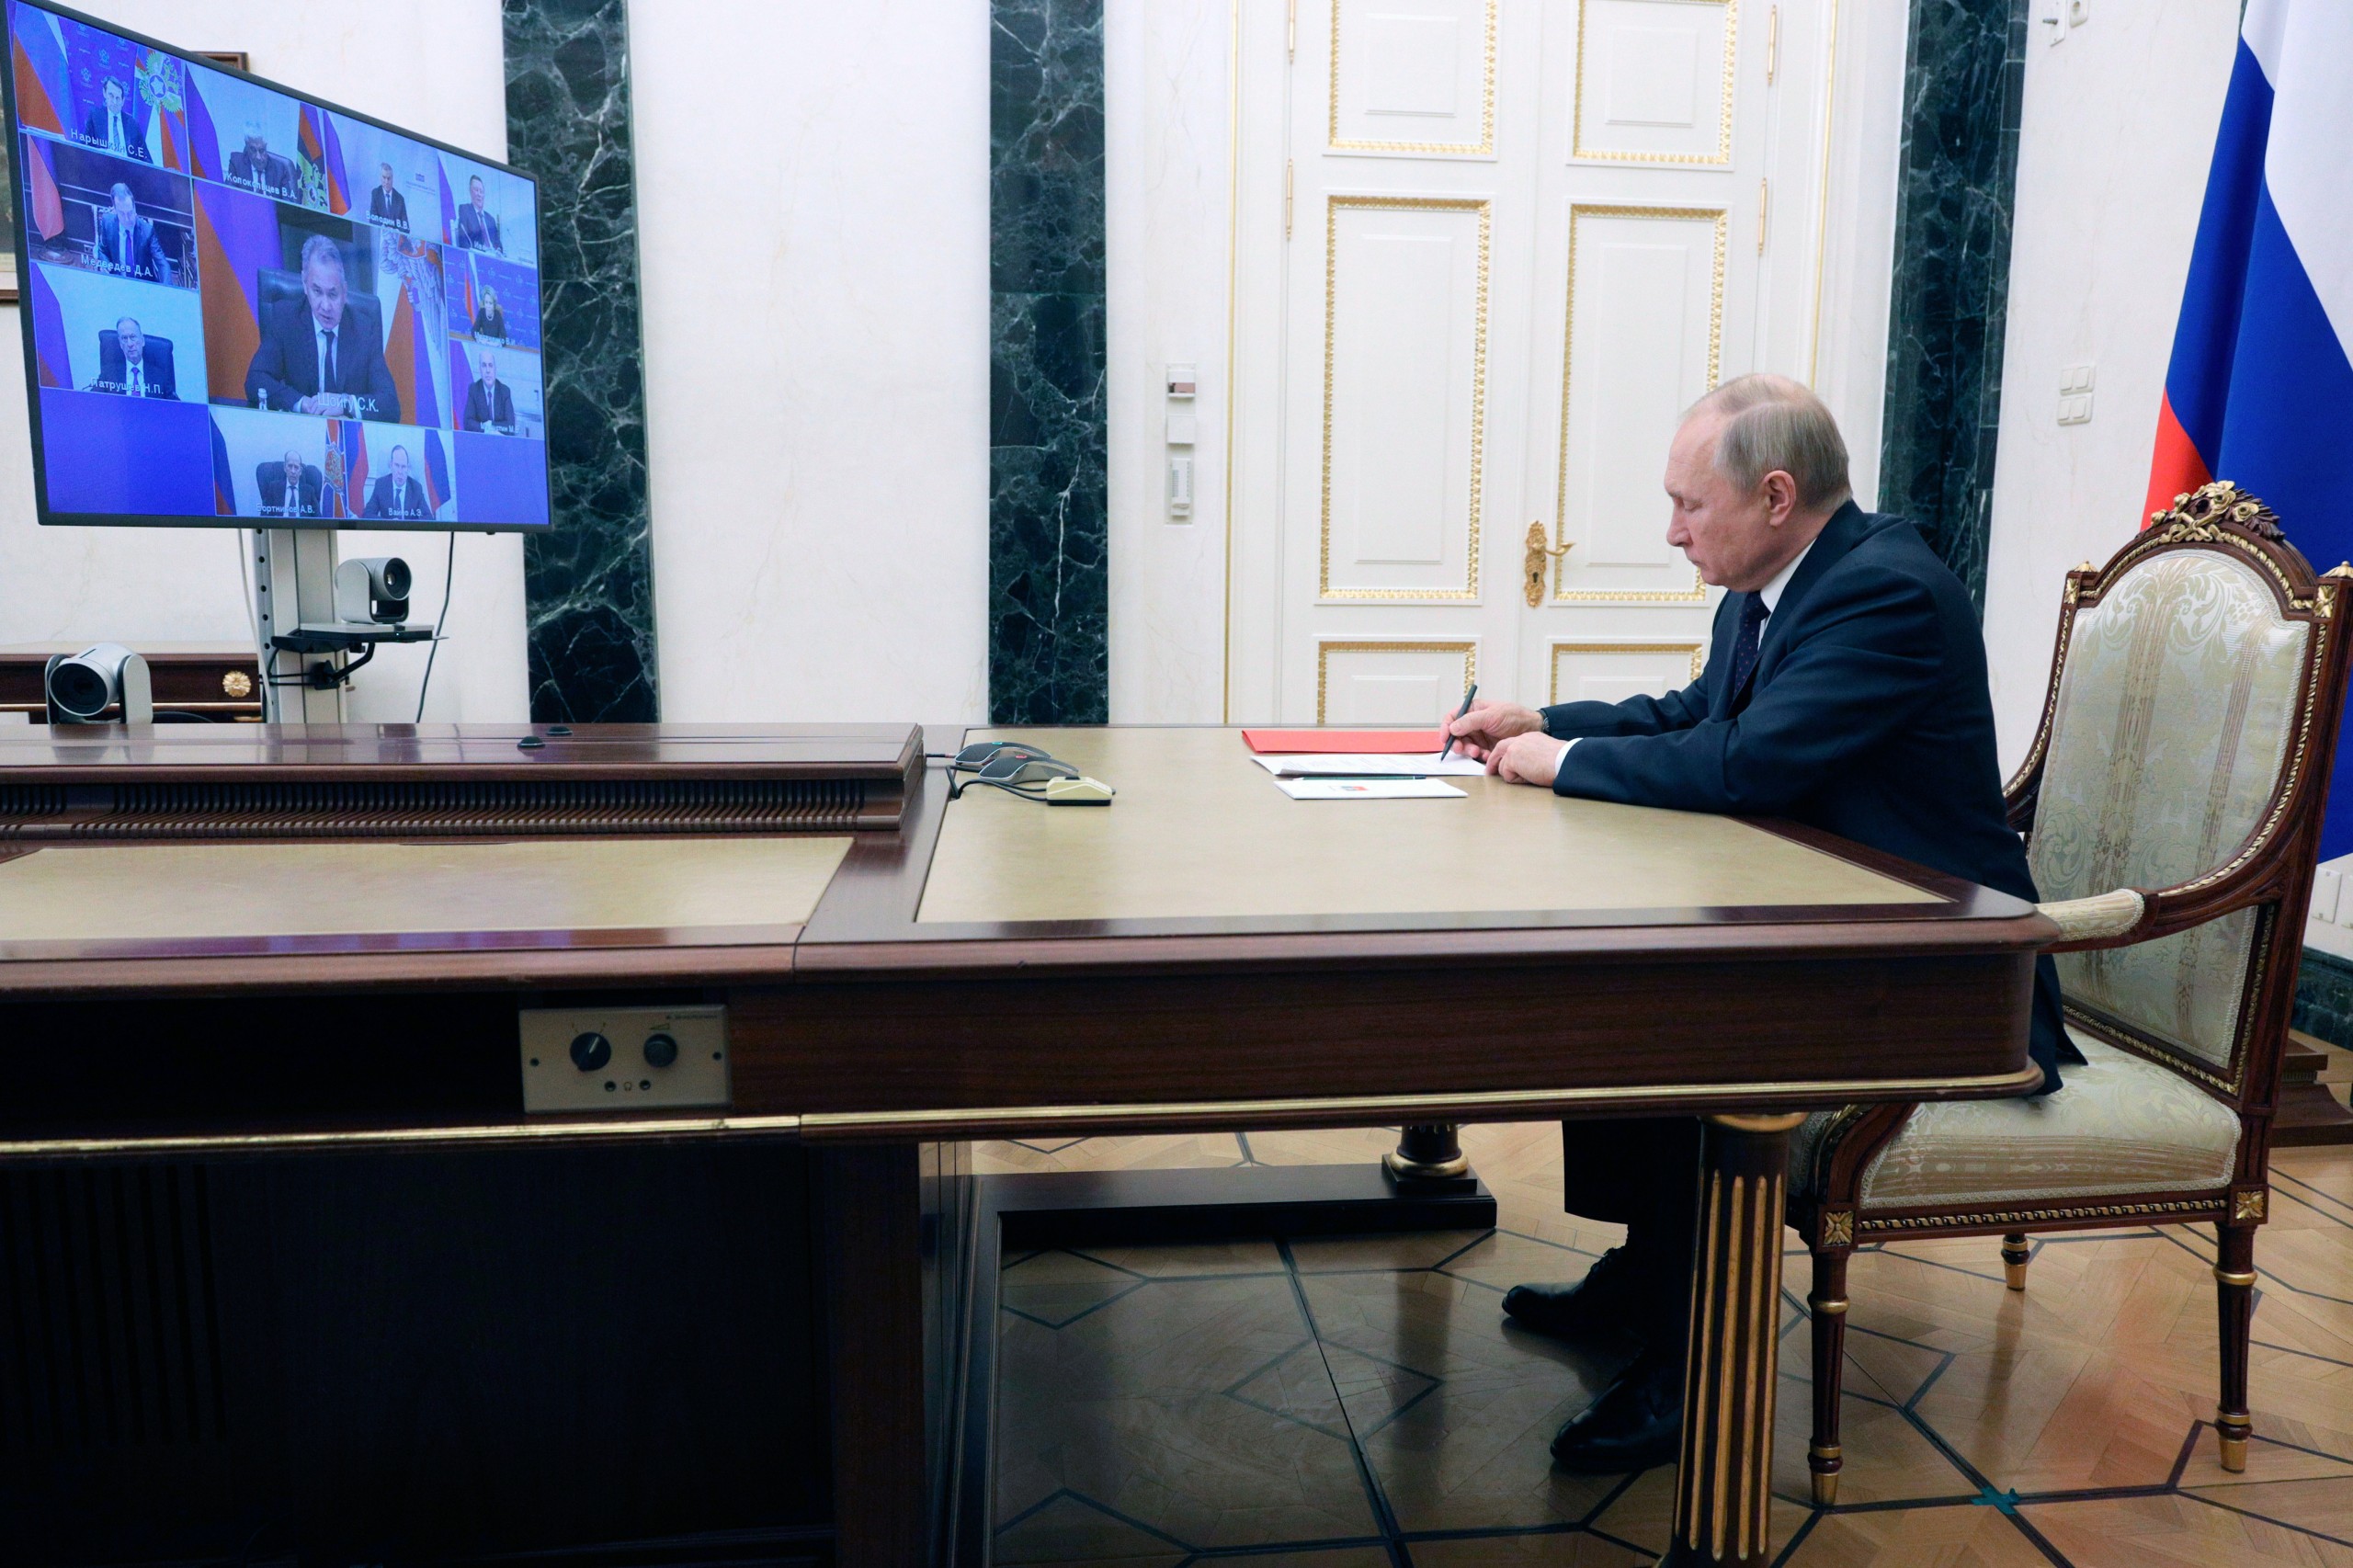 epa09816776 Russian President Vladimir Putin chairs a meeting with permanent members of the Russsia's Security Council via teleconference call at the Kremlin in Moscow, Russia, 11 March 2022.  EPA/MIKHAIL KLIMENTYEV / SPUTNIK / KREMLIN POOL MANDATORY CREDIT